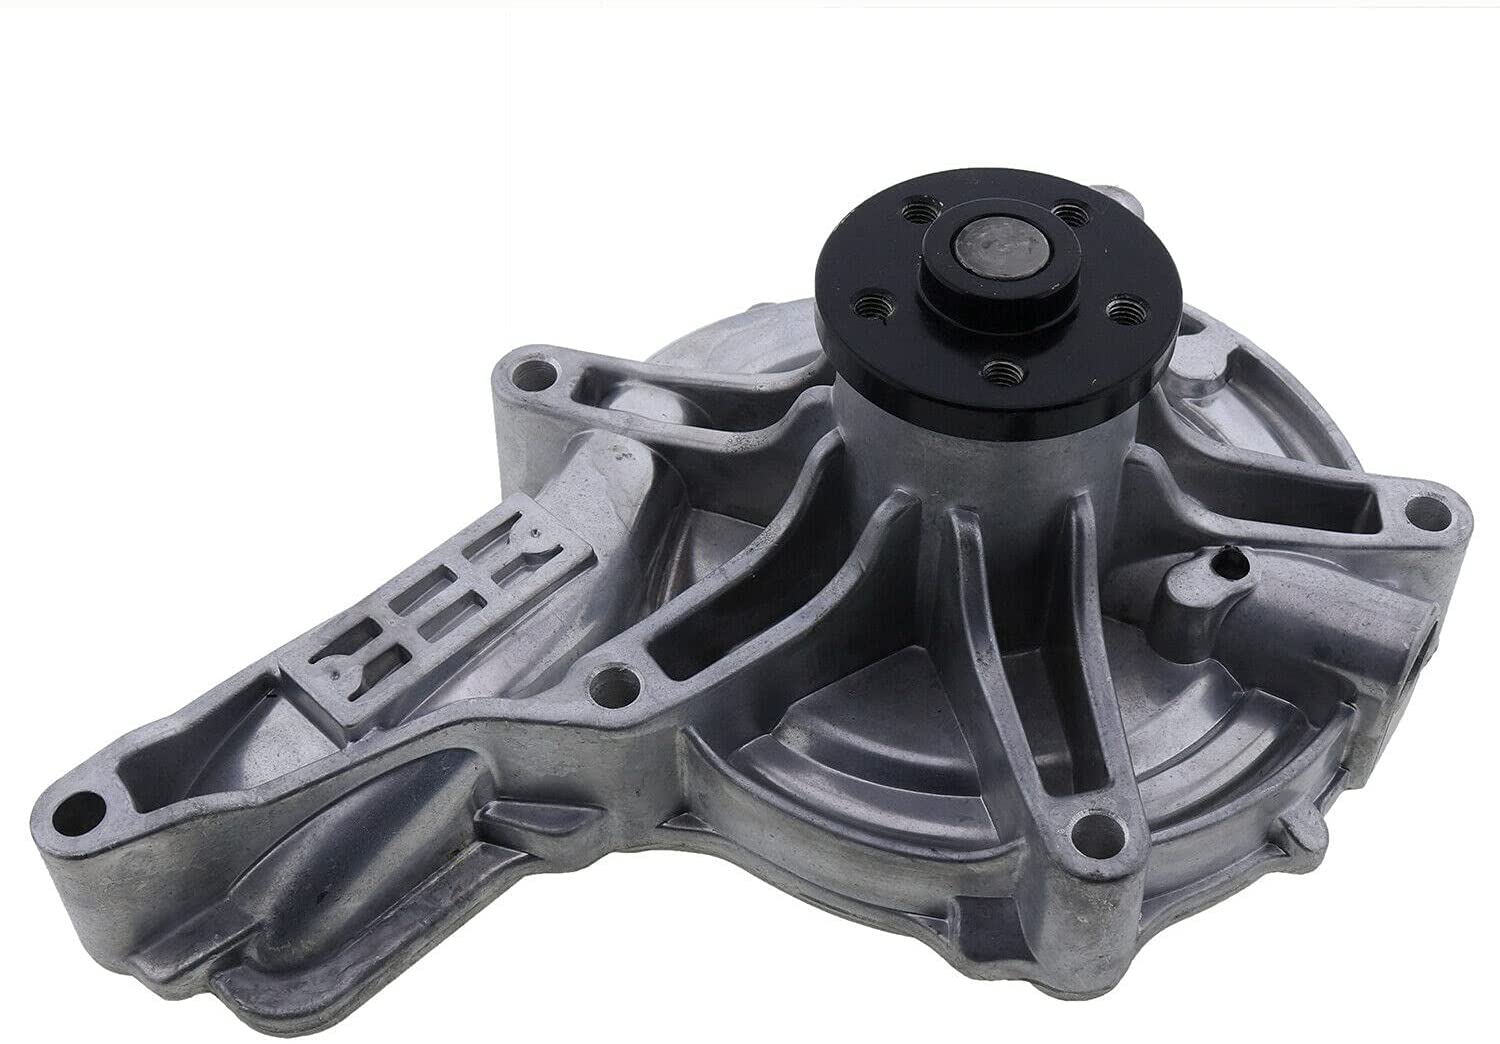 Water Pump for PAI 801131E Volvo D11 D13 D16 MACK MP7 MP8 20744939 85109694 85124623 - KUDUPARTS